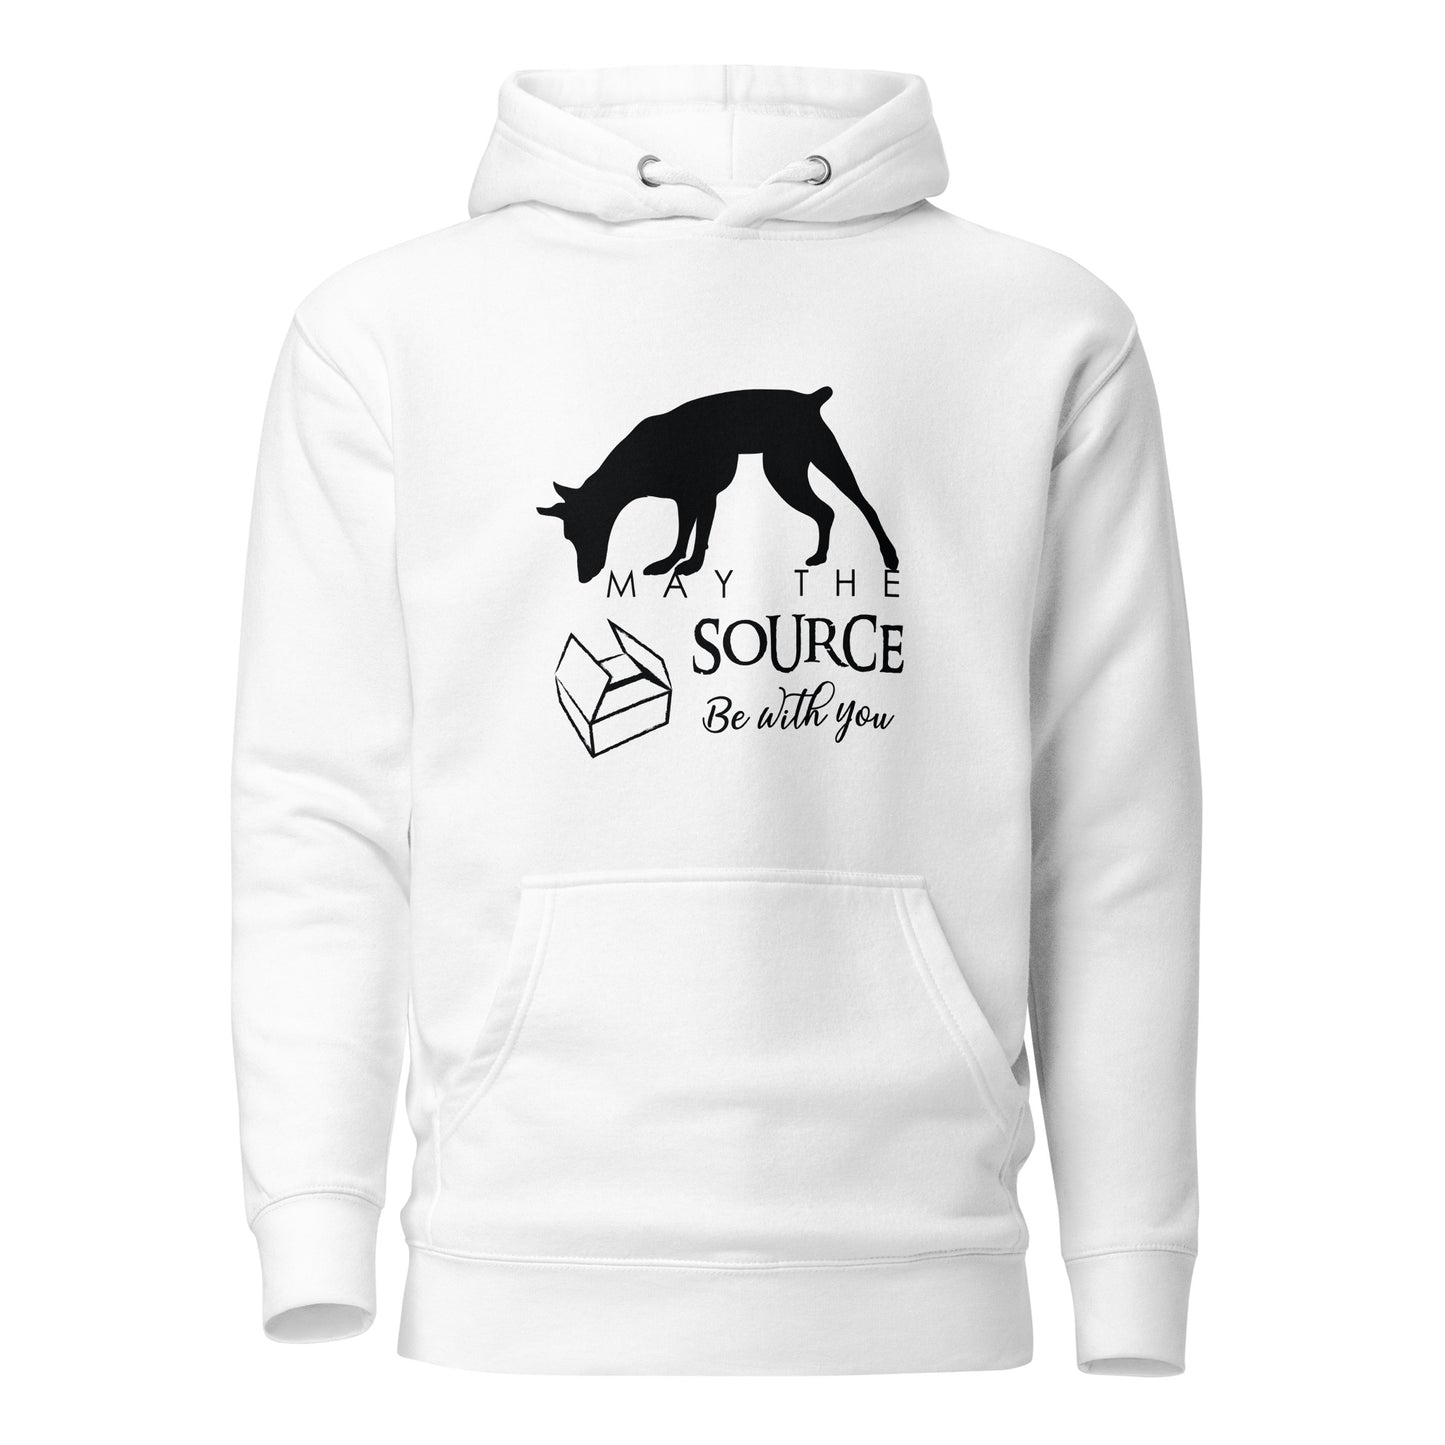 May the source be with you - DOBIE - Unisex Hoodie White